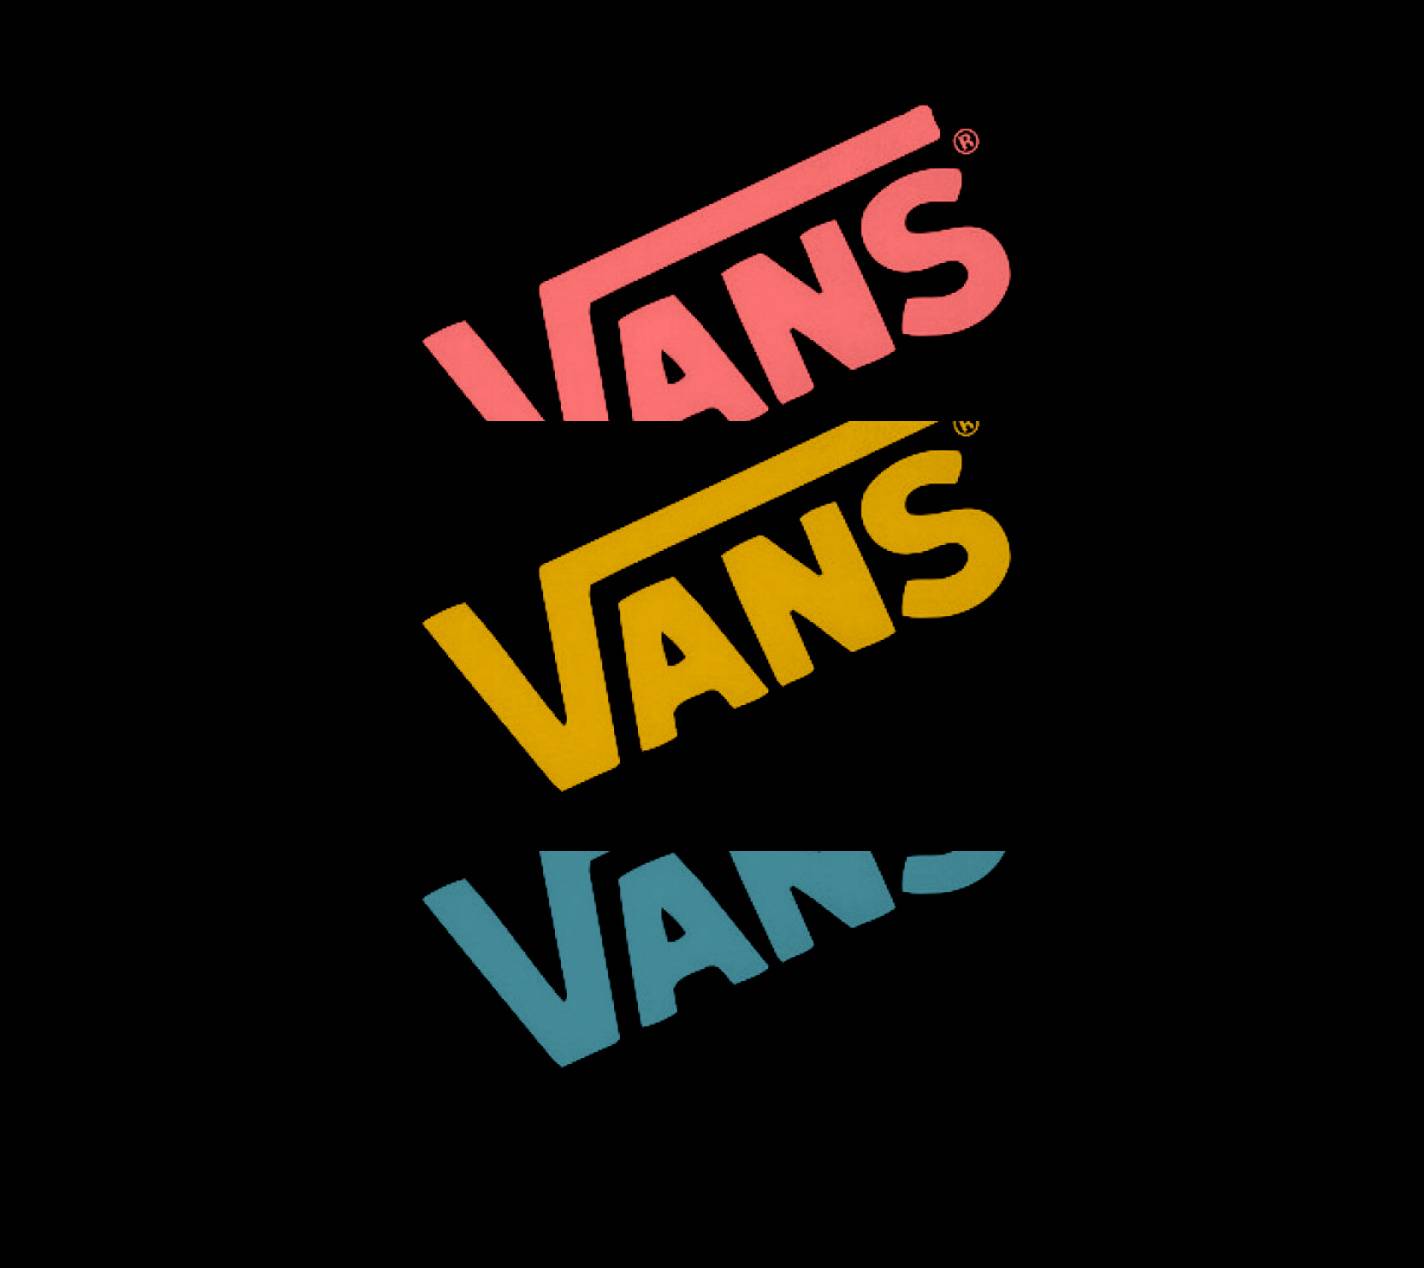 Vans Off the Wall Logo Wallpapers on 